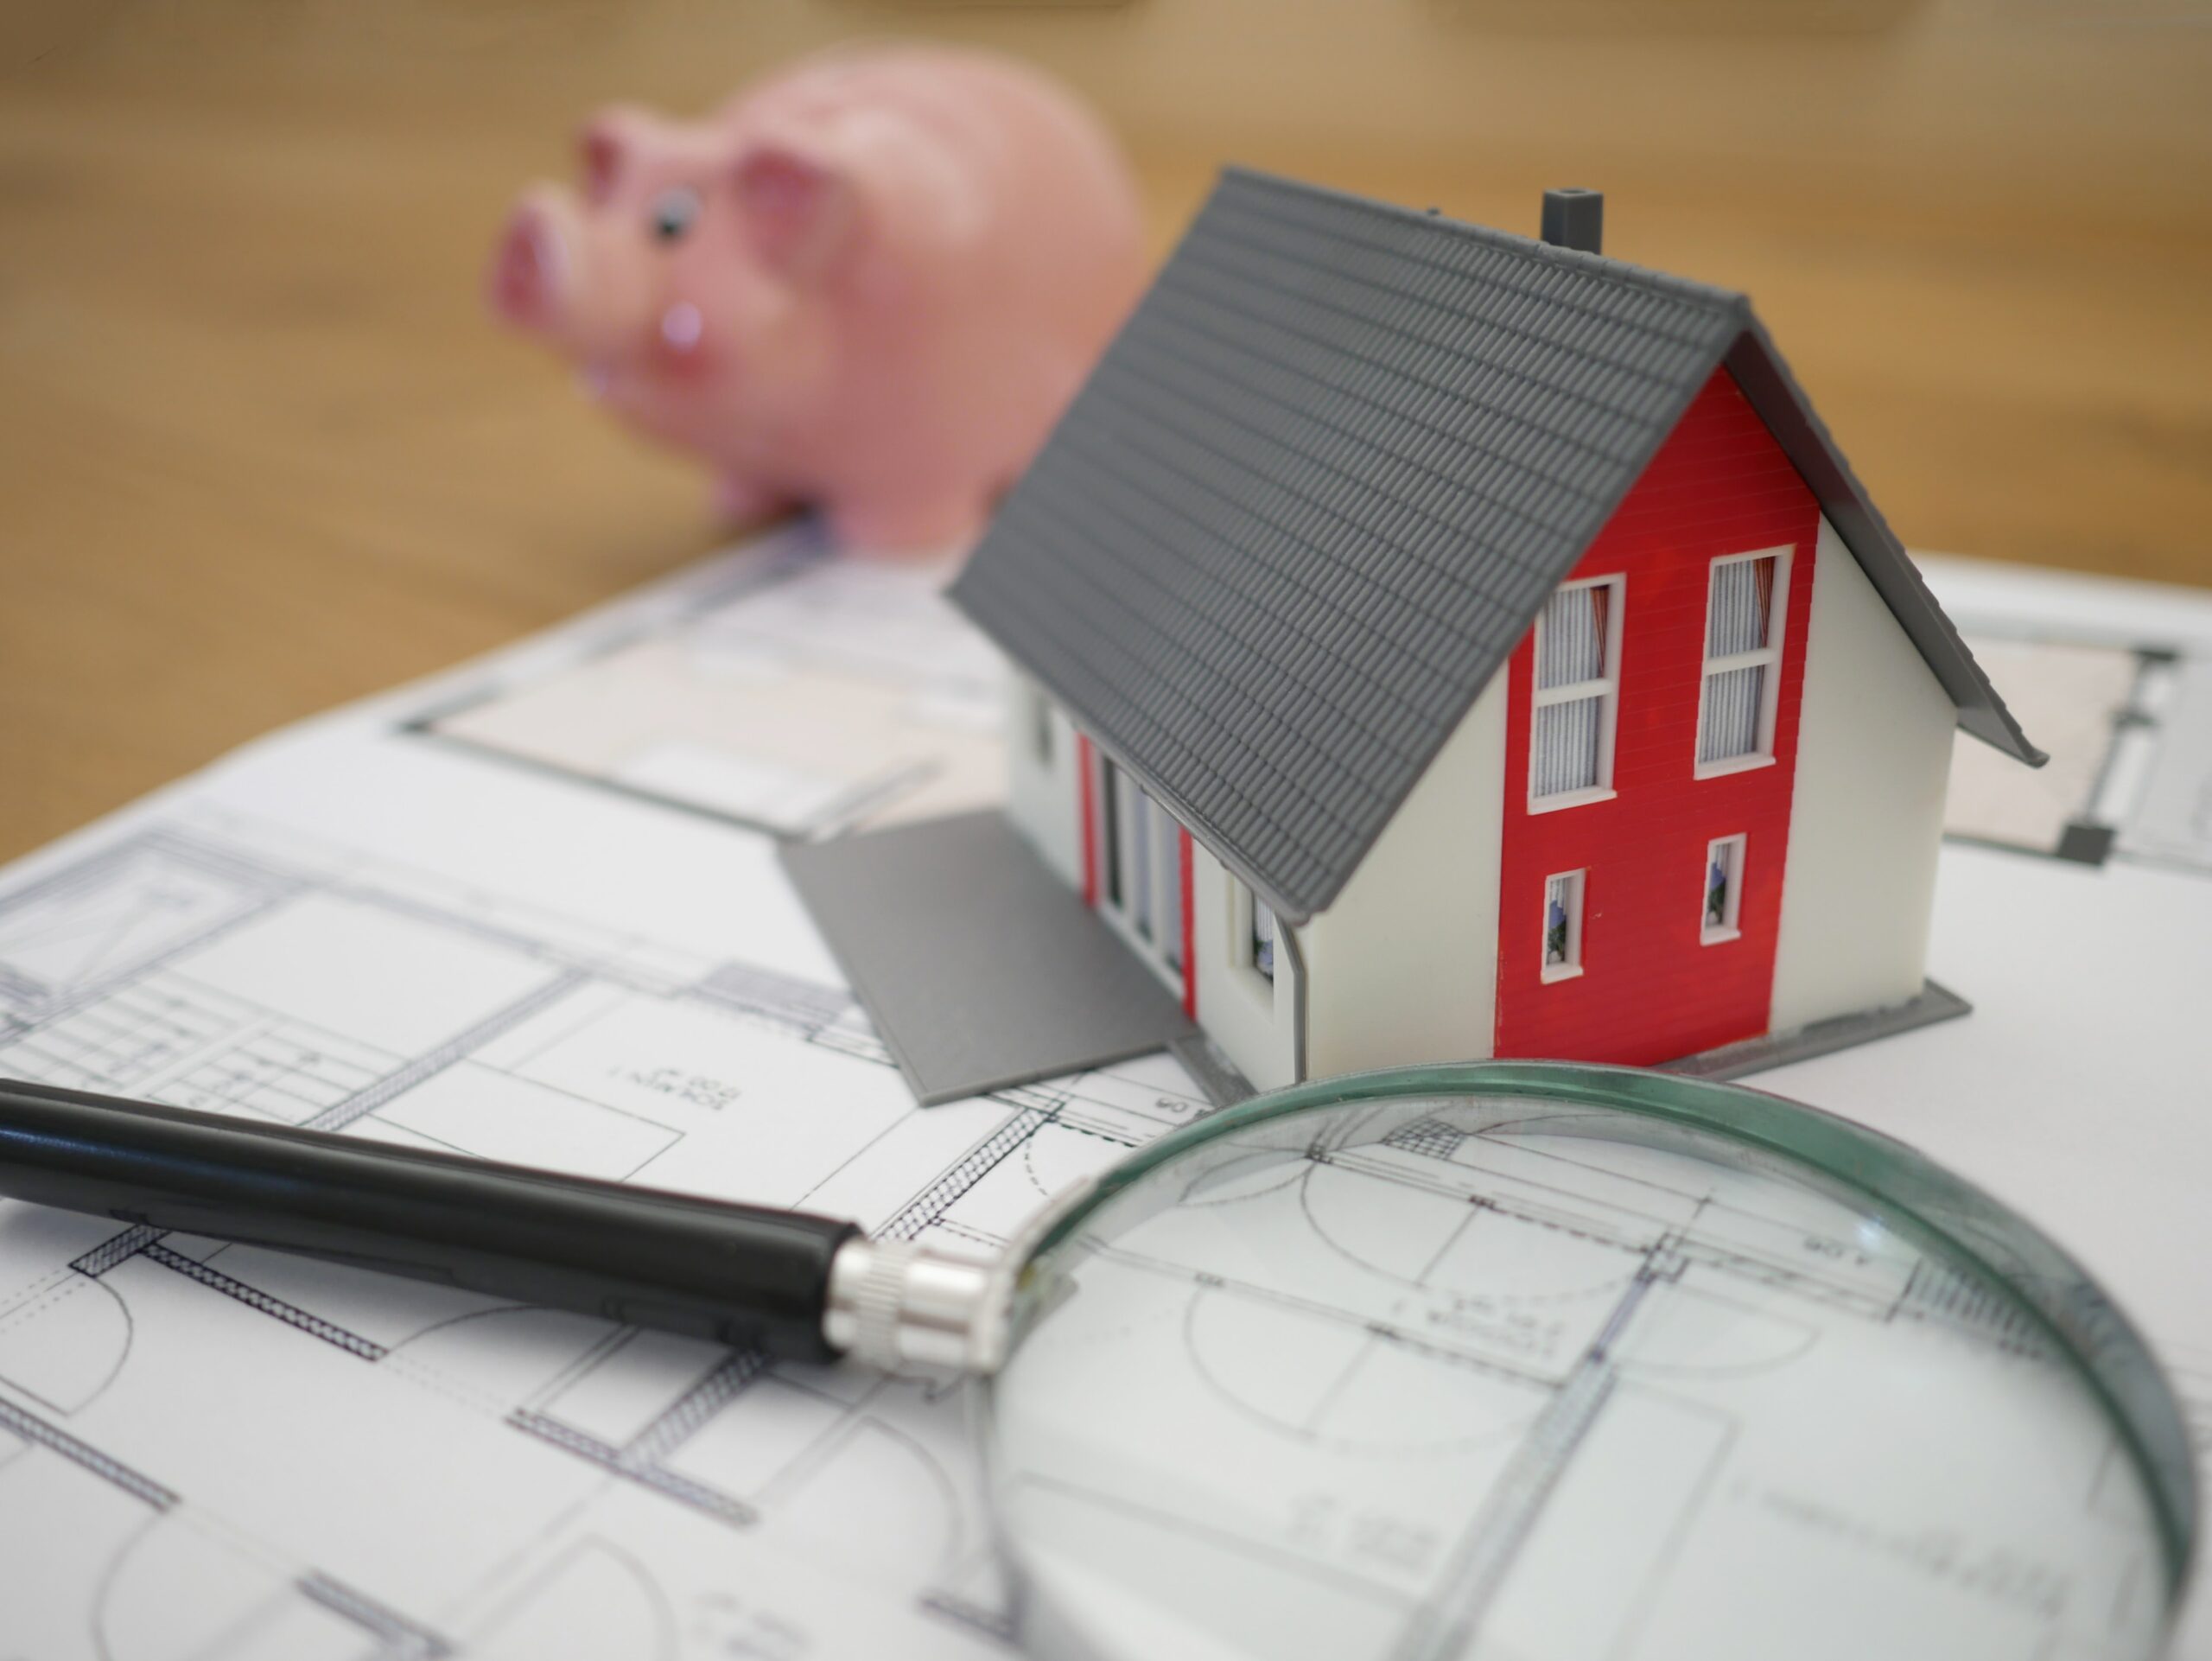 Image of a house floorplan, miniature home, and a piggy bank to emphasize that property managers must be knowlegable in real estate.